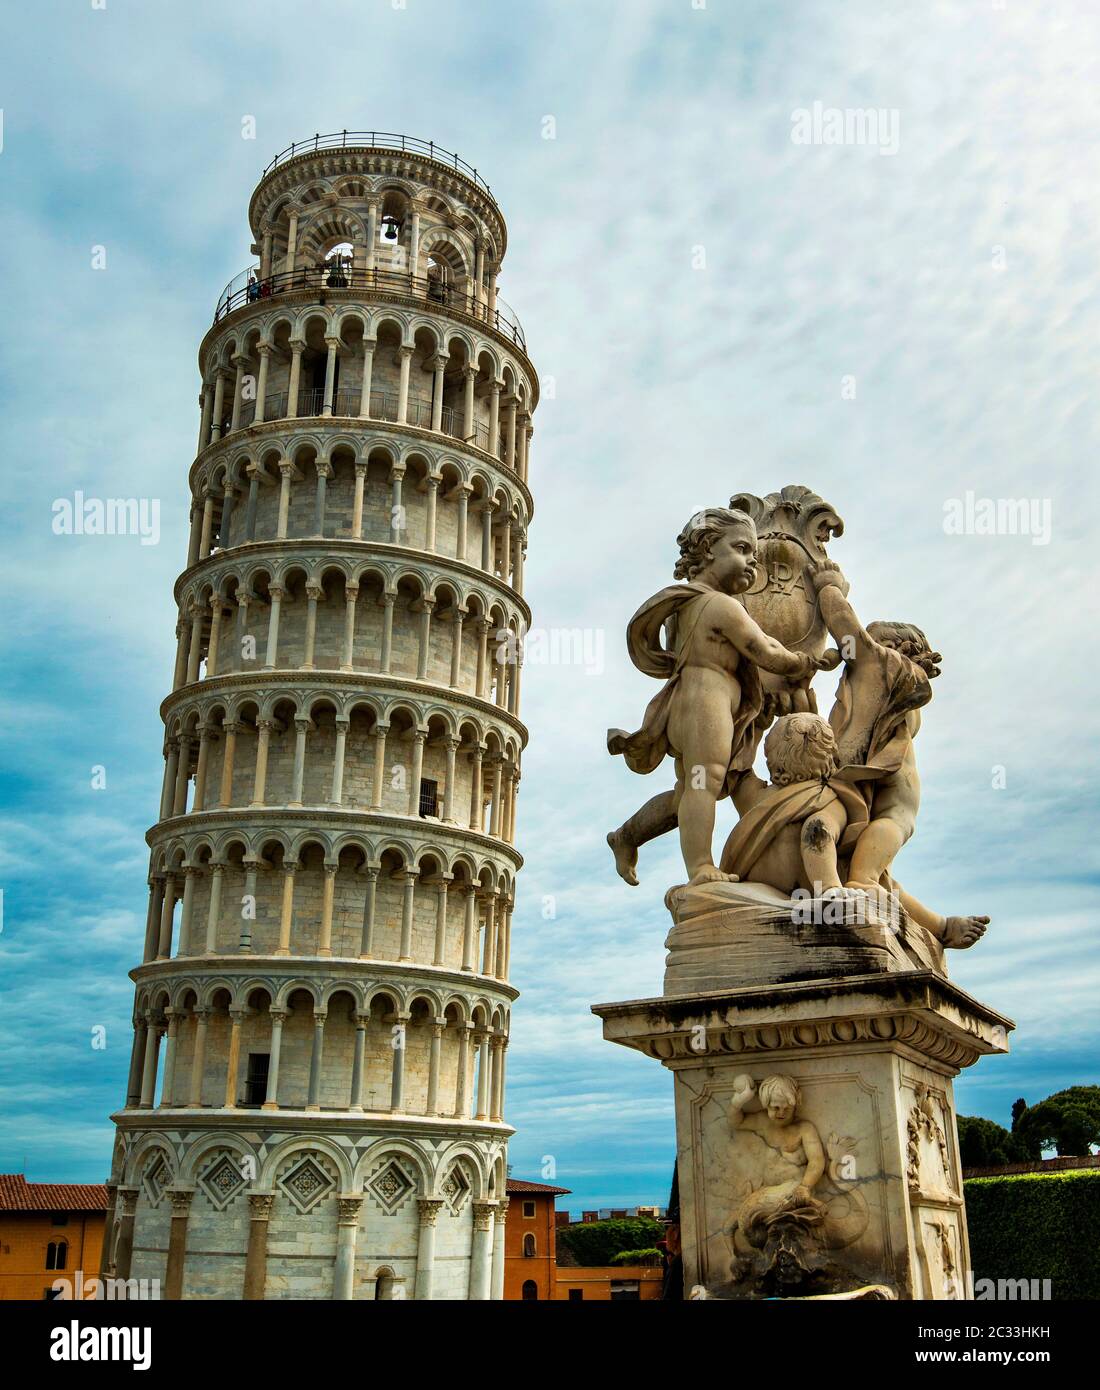 Leaning Tower of Pisa, Pisa, Tuscany, Italy. Leaning Tower of Pisa is one of the most remarkable architectural structures from medieval Europe. Stock Photo